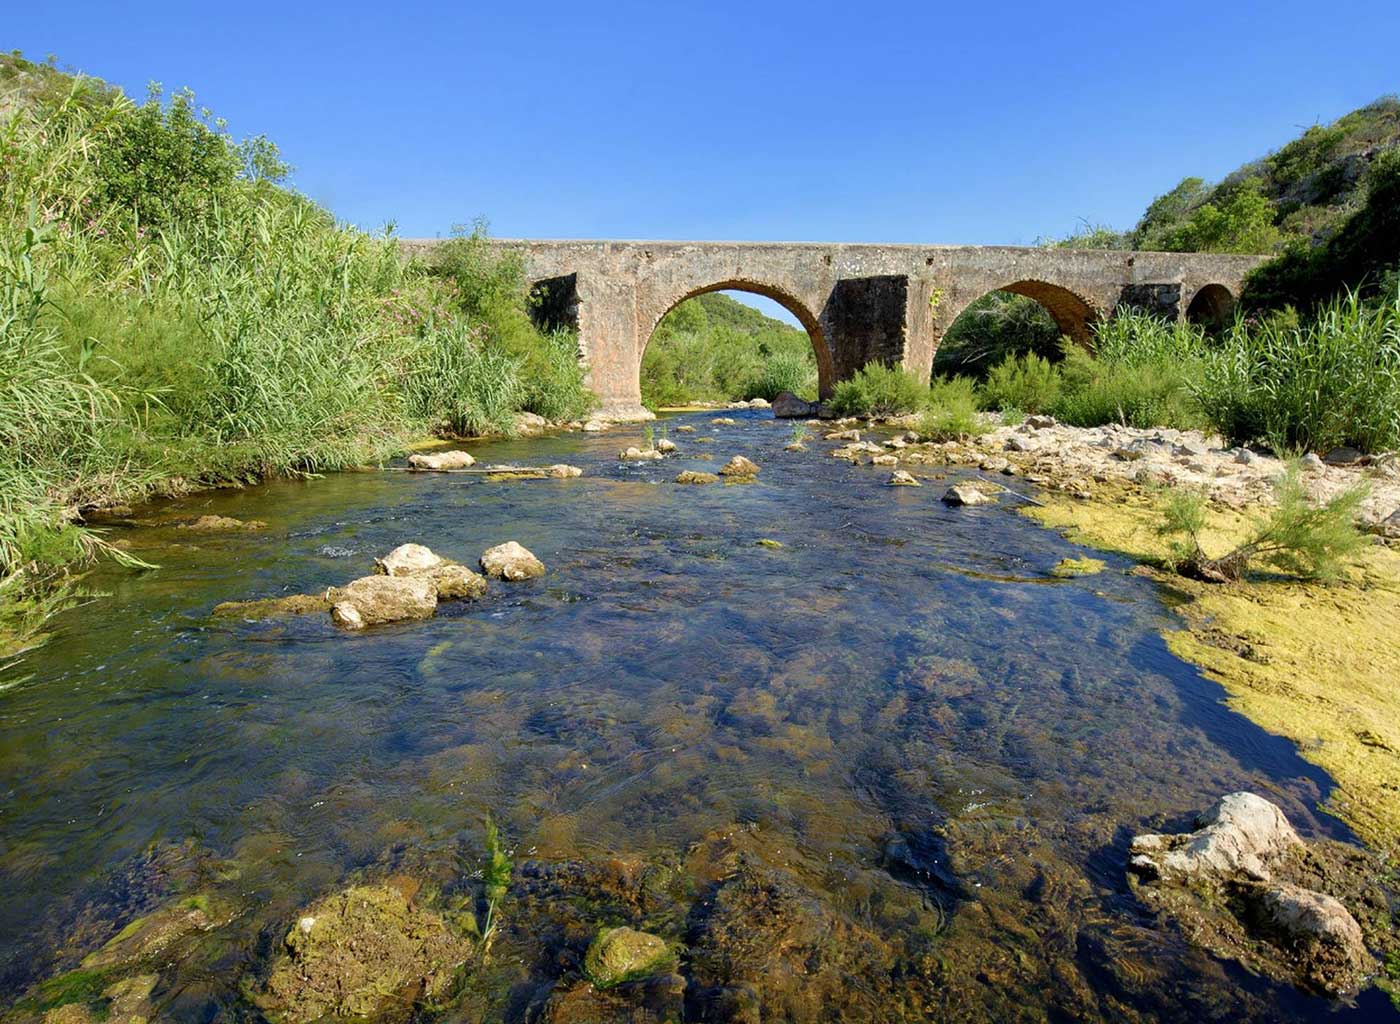 Historical aqueduct crossing over a river in Algrave, Portugal